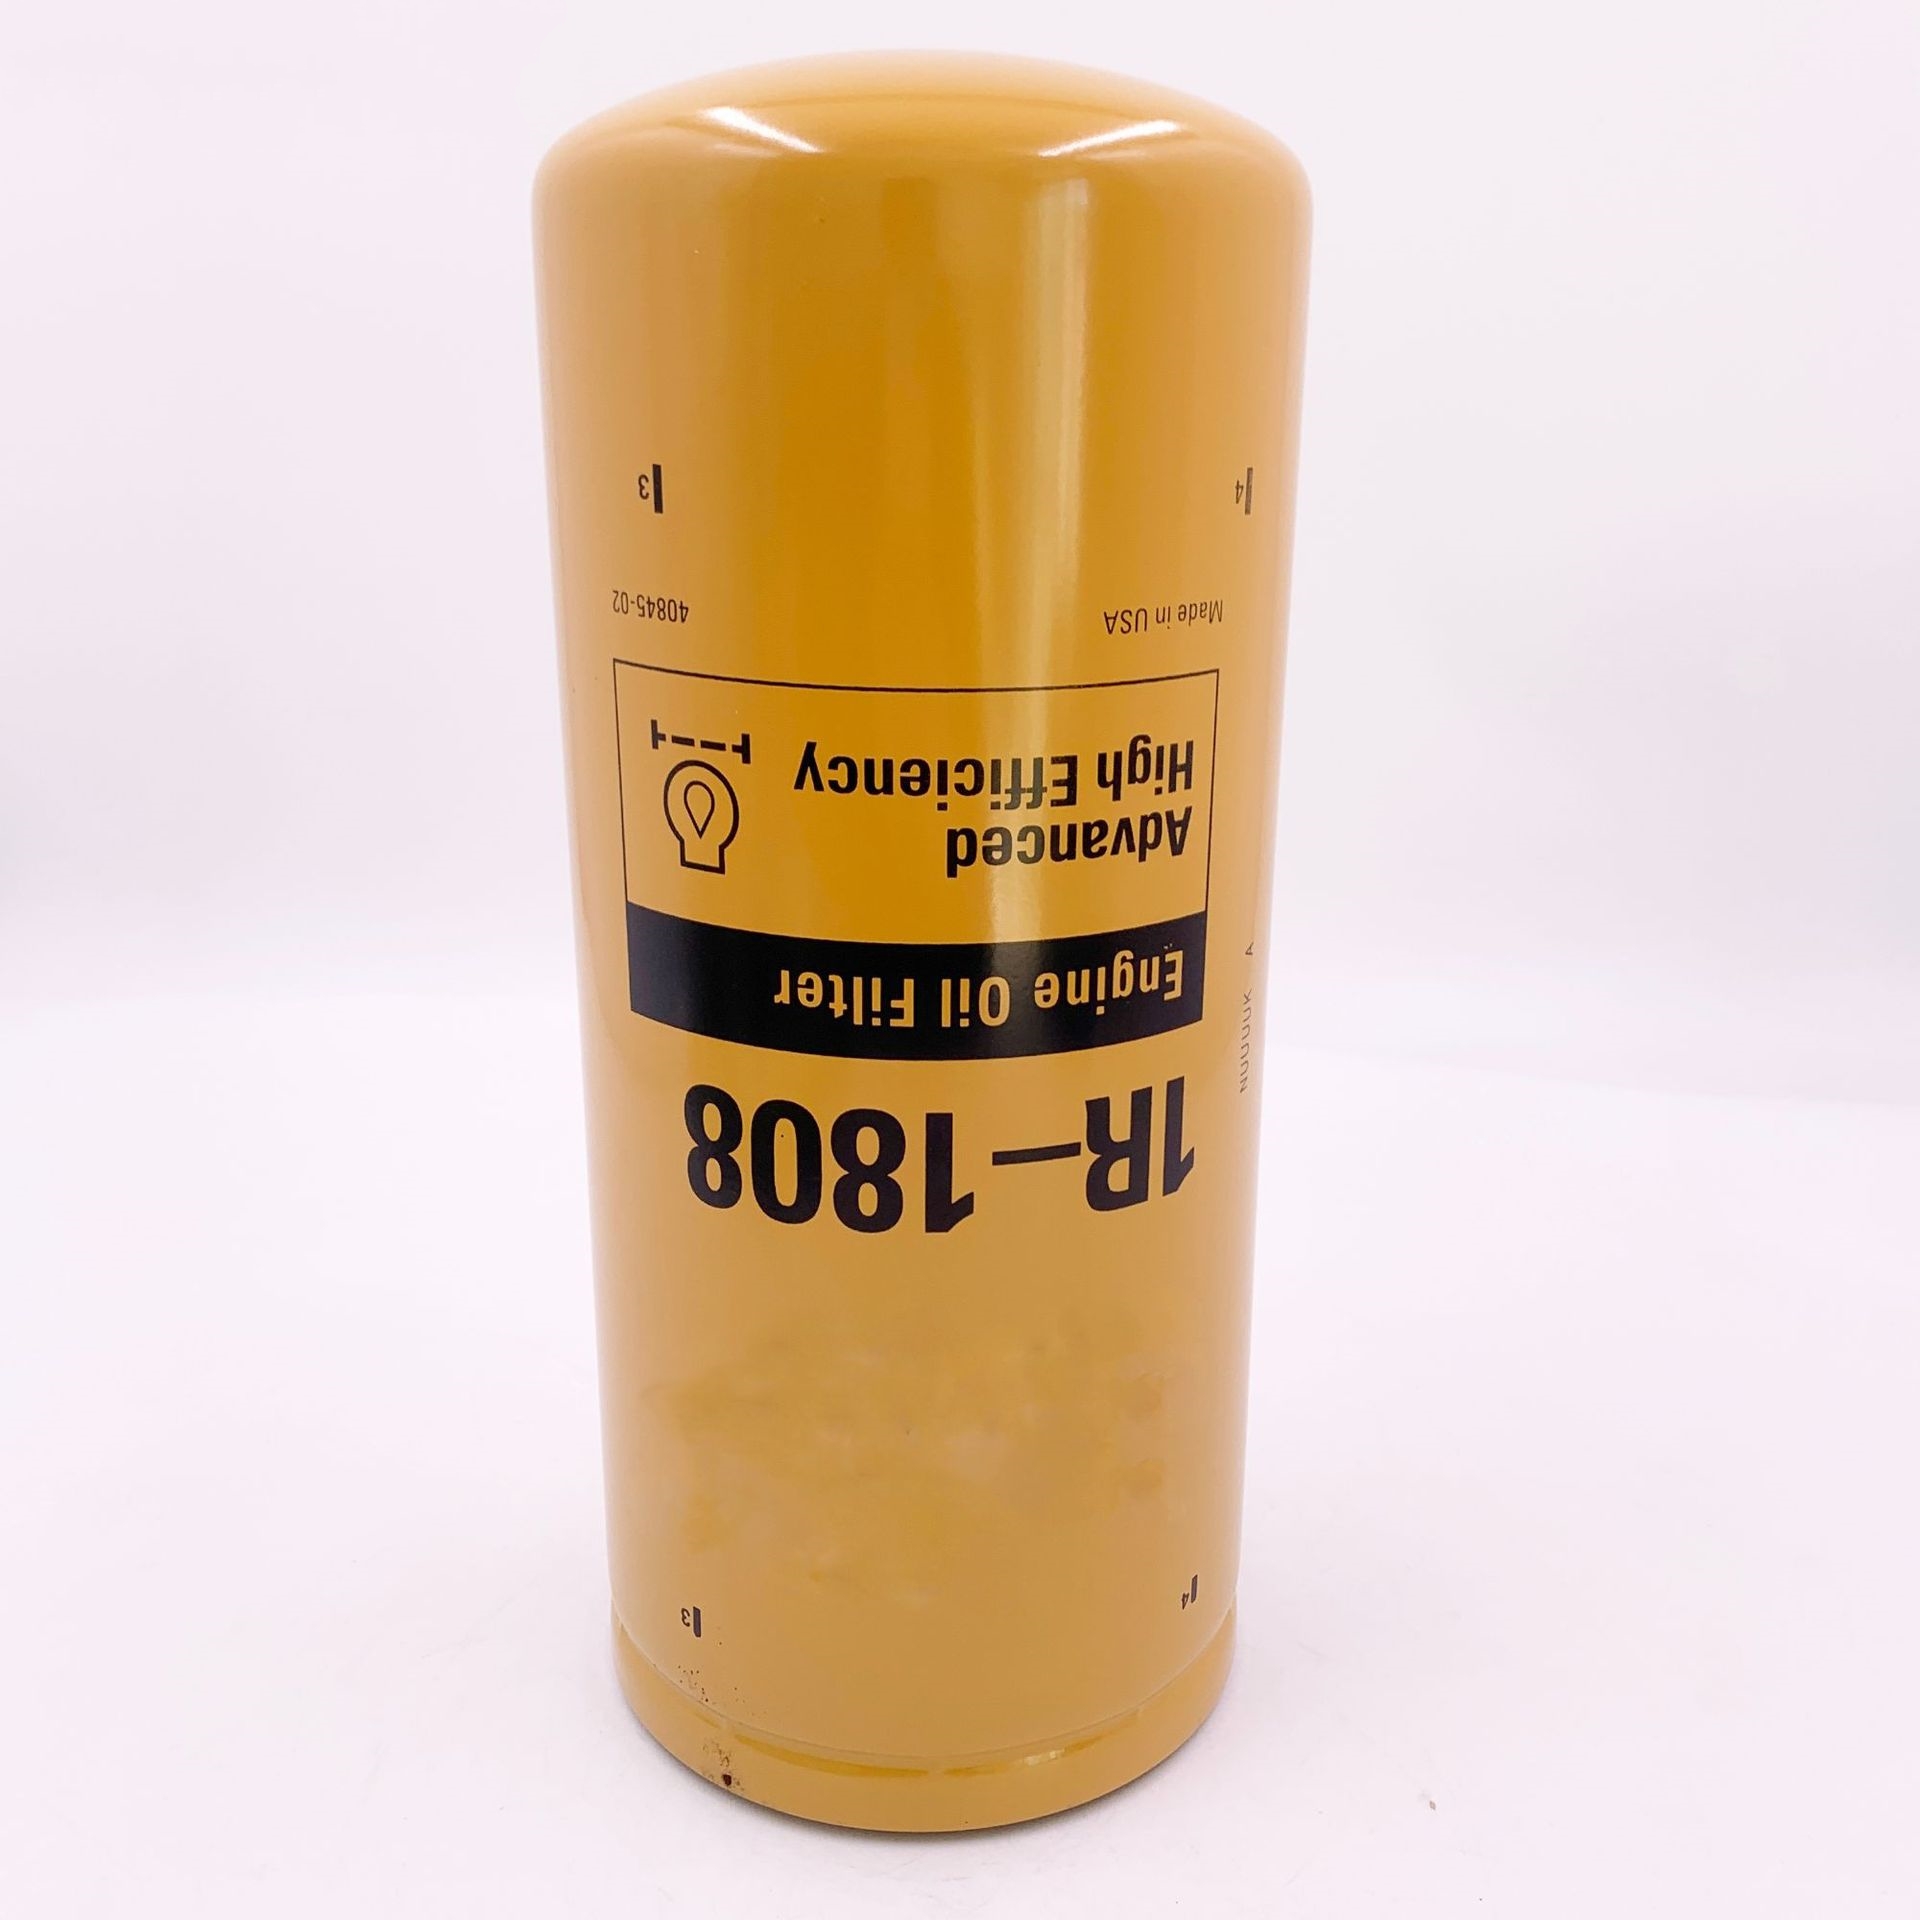 Replace CATERPILLAR Engineering Machinery Oil Filter Element 1R-1808